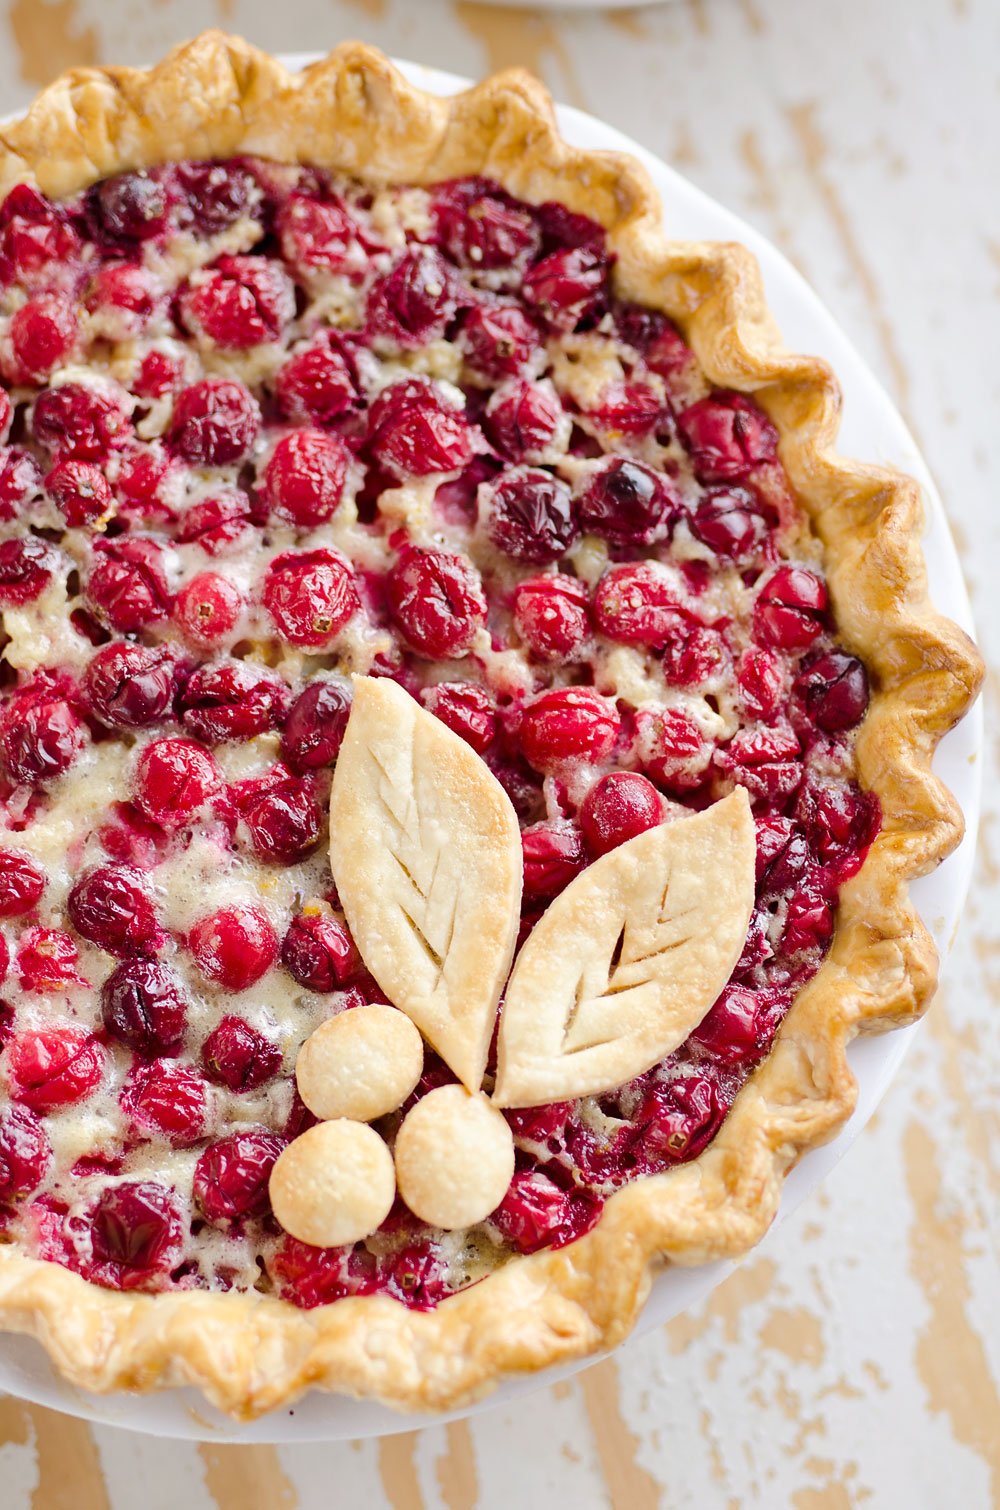 Cranberry Orange Custard Pie is a festive and unique pie to enjoy during the holiday season. Silky sweet custard laced with orange zest and tart cranberries fill a flaky pie crust for a delicious dessert you will love!